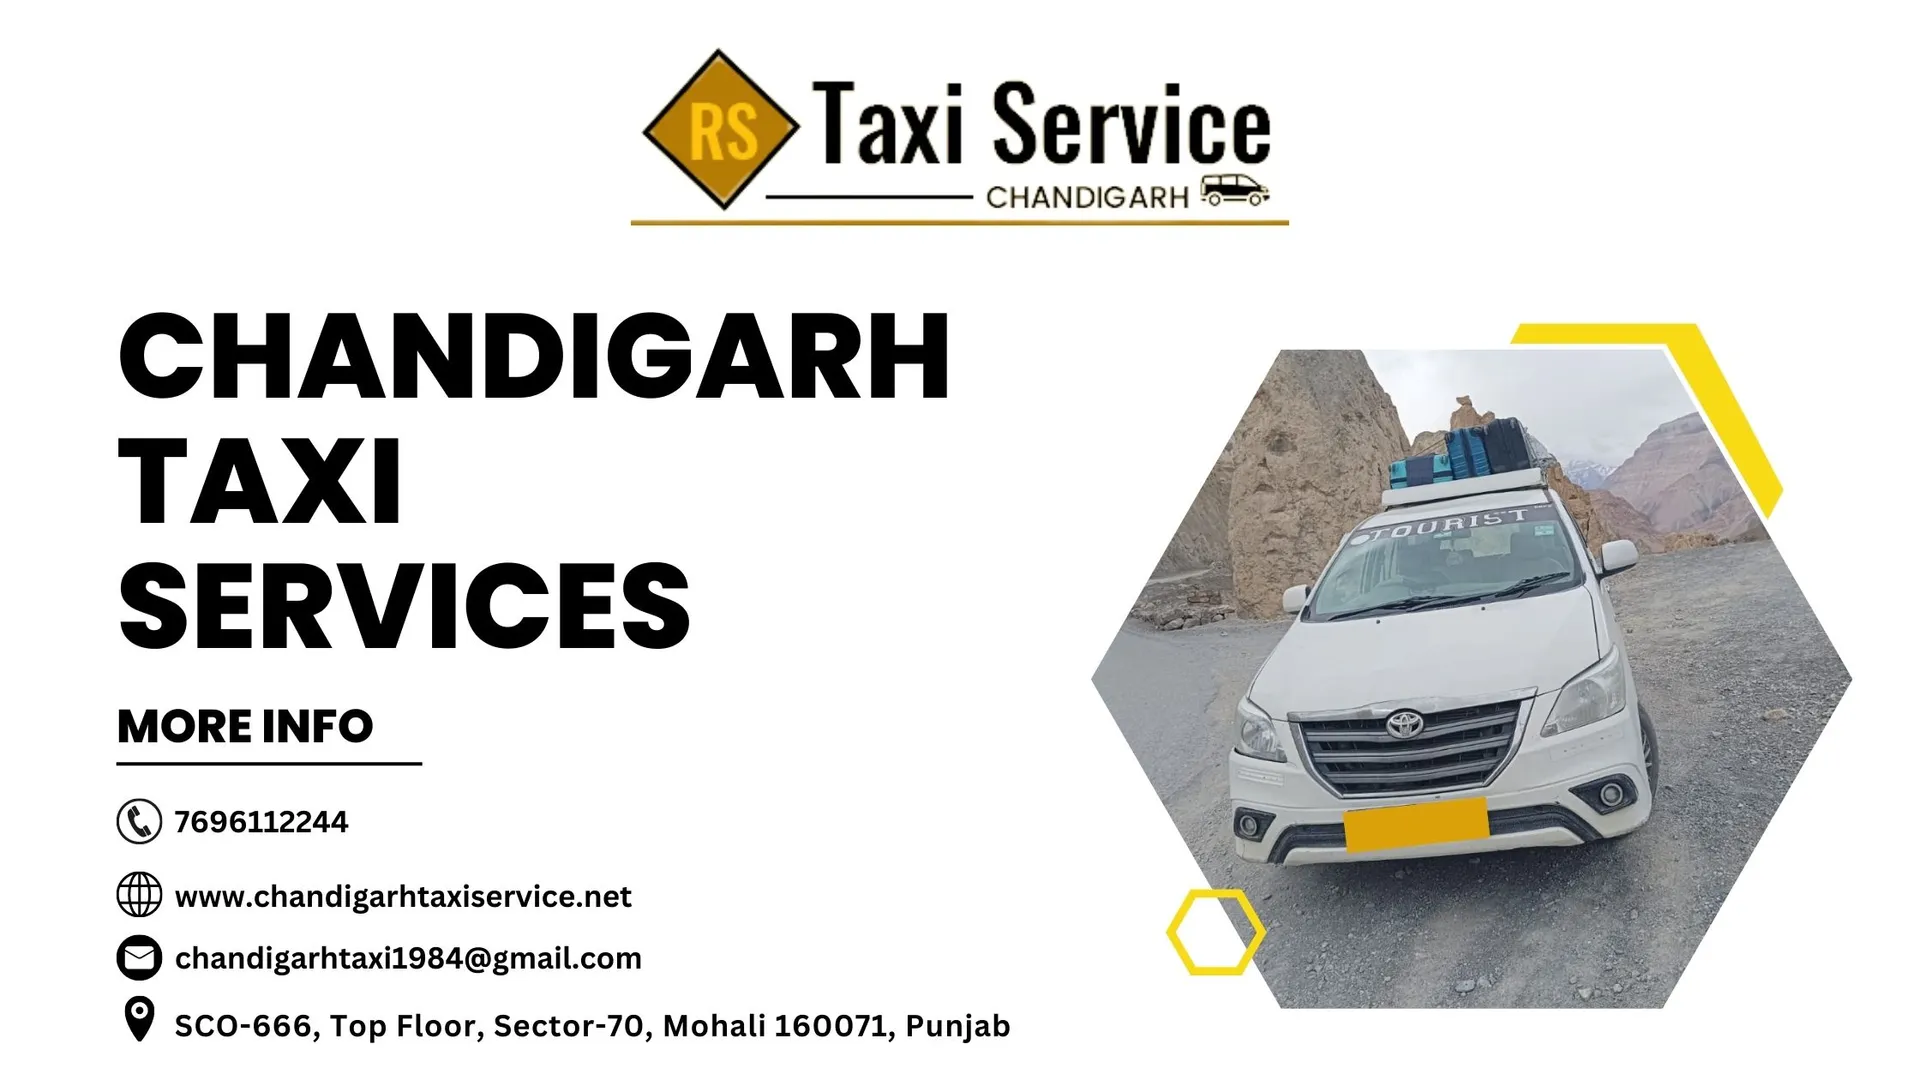 Booking a taxi with RS Taxi Service is quick and easy, making your travel plans effortless. Trust us to be your travel partner and experience the convenience and comfort of our Chandigarh taxi services. Book your ride now and let us take you on an unforgettable journey.

Contact Person Name:- Ravi Salaria
Contact no. 7696112244
Address:- SCO-666, Top Floor, Sector-70, Mohali 160071, Punjab
Website:- https://www.chandigarhtaxiservice.net/
Email:- chandigarhtaxi1984@gmail.com